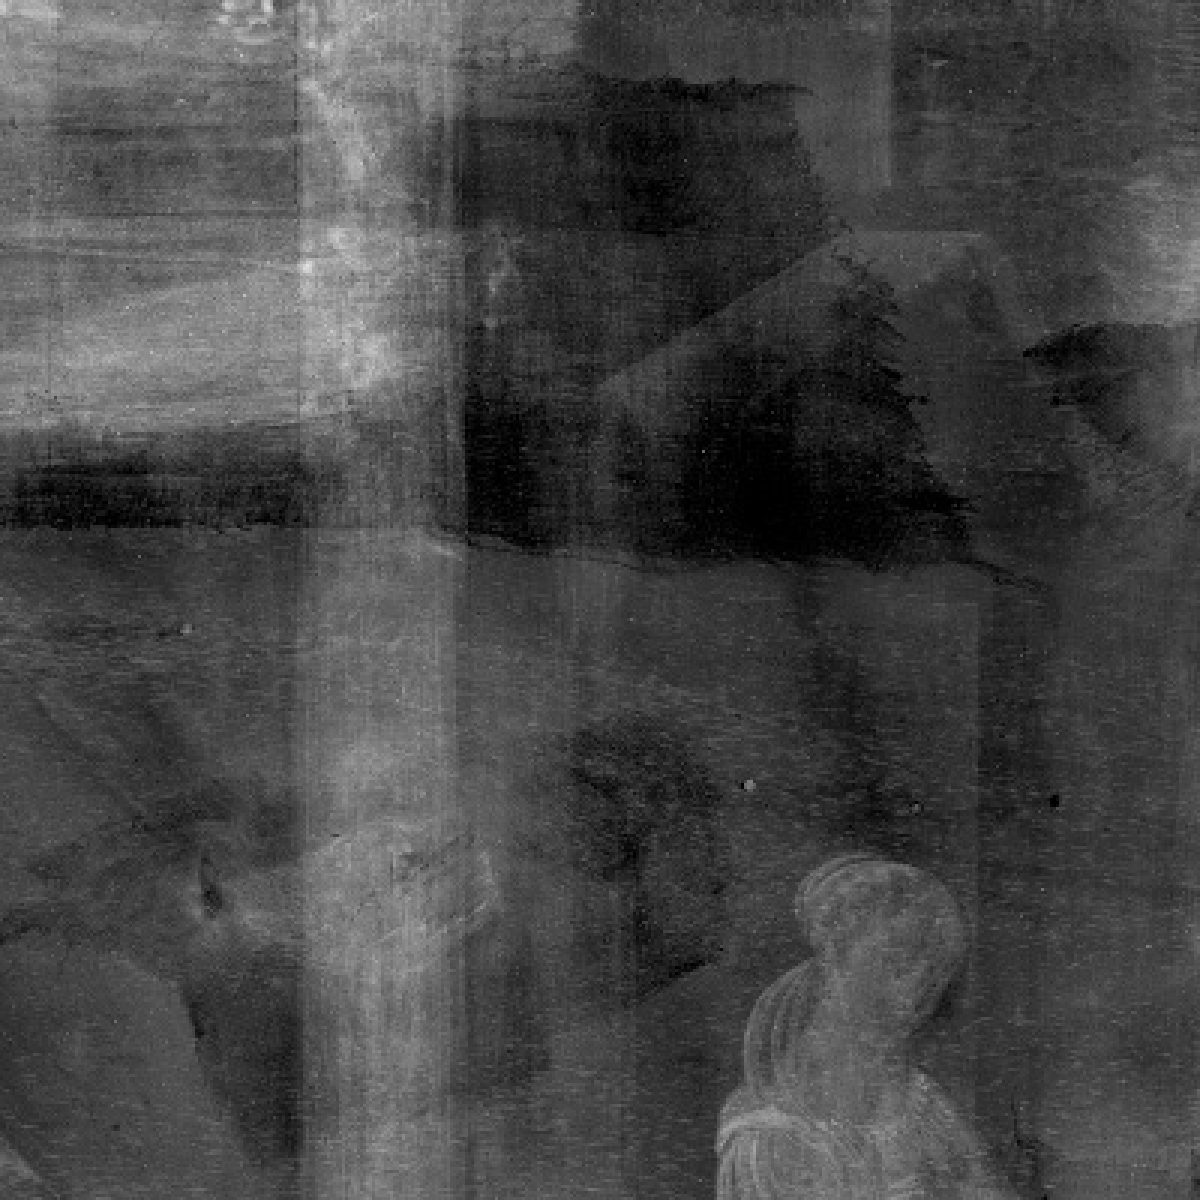 Section of x-ray of Cupid & Psyche showing some canvas, the painting is lightly visible